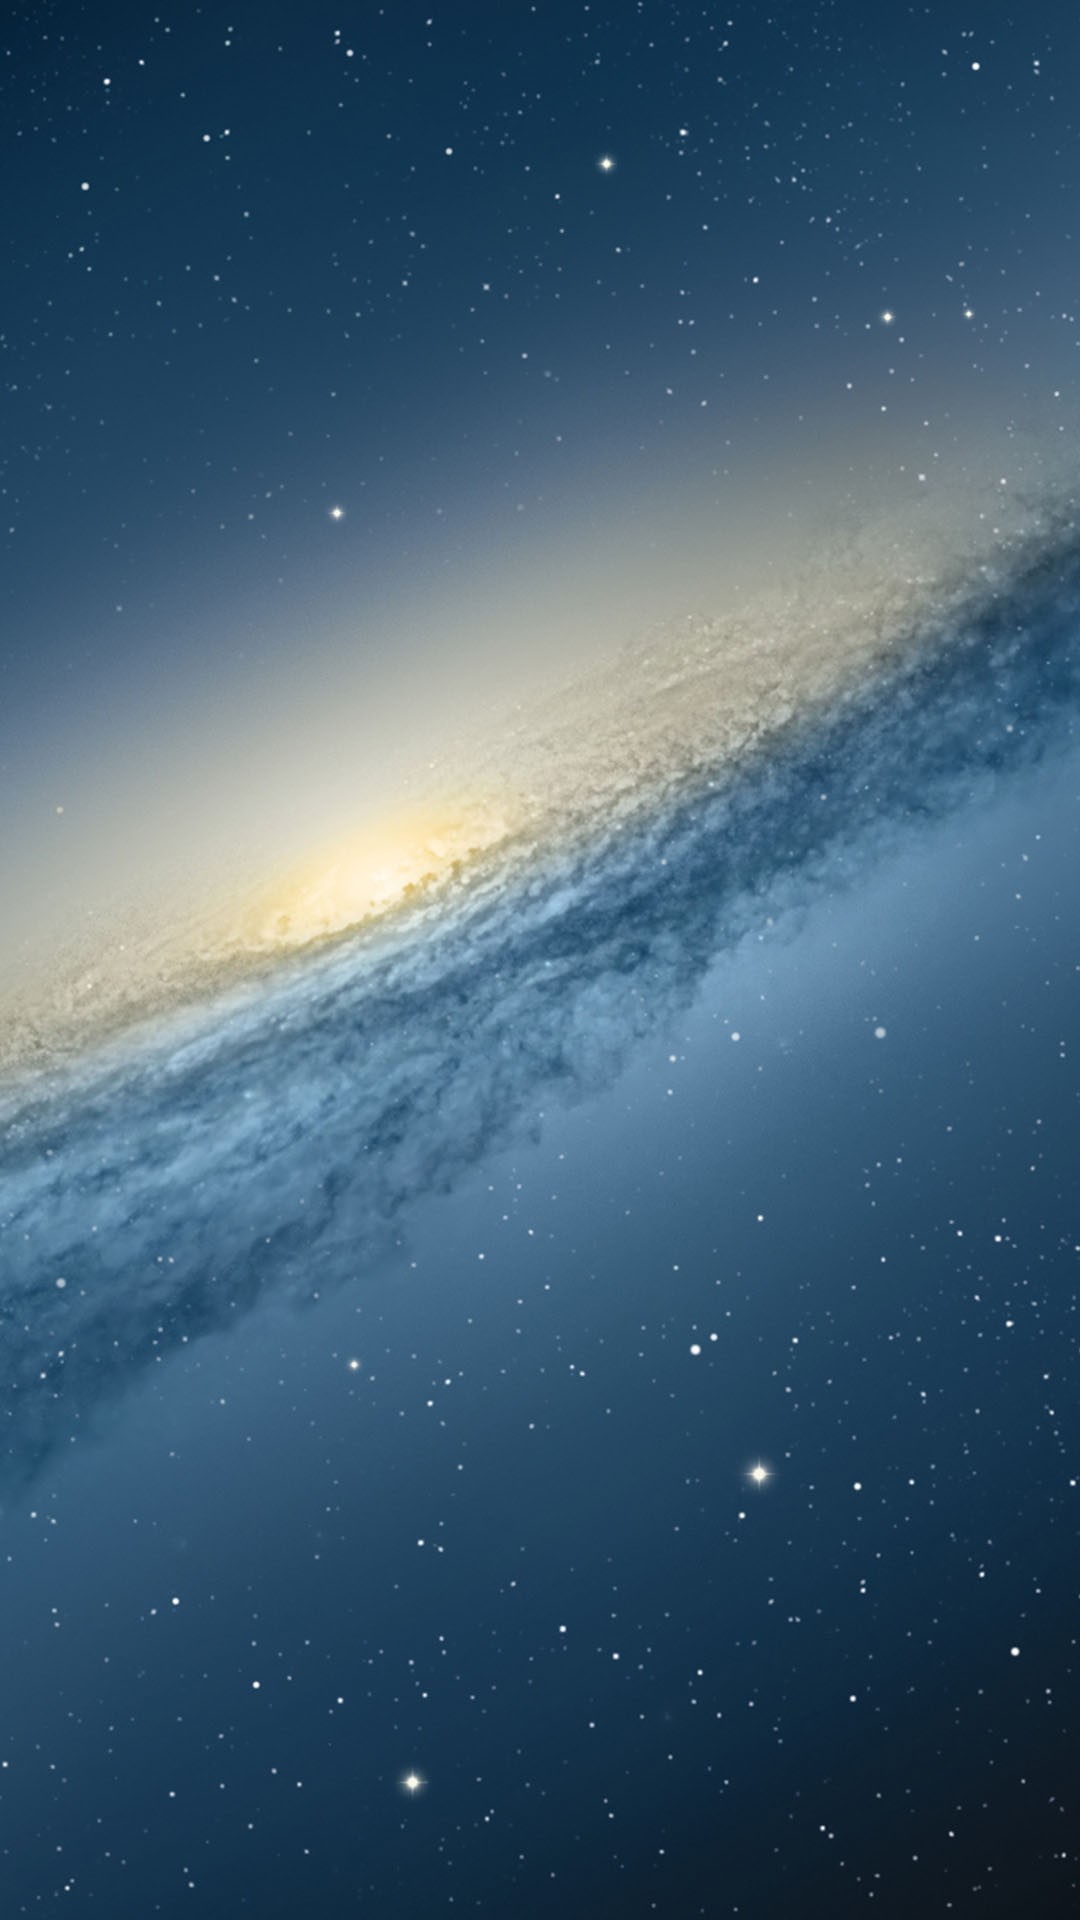 Awesome Light Outer Space Samsung Wallpaper Download Samsung Hd Wallpapers Iphone14 スマホ壁紙 待受画像ギャラリー